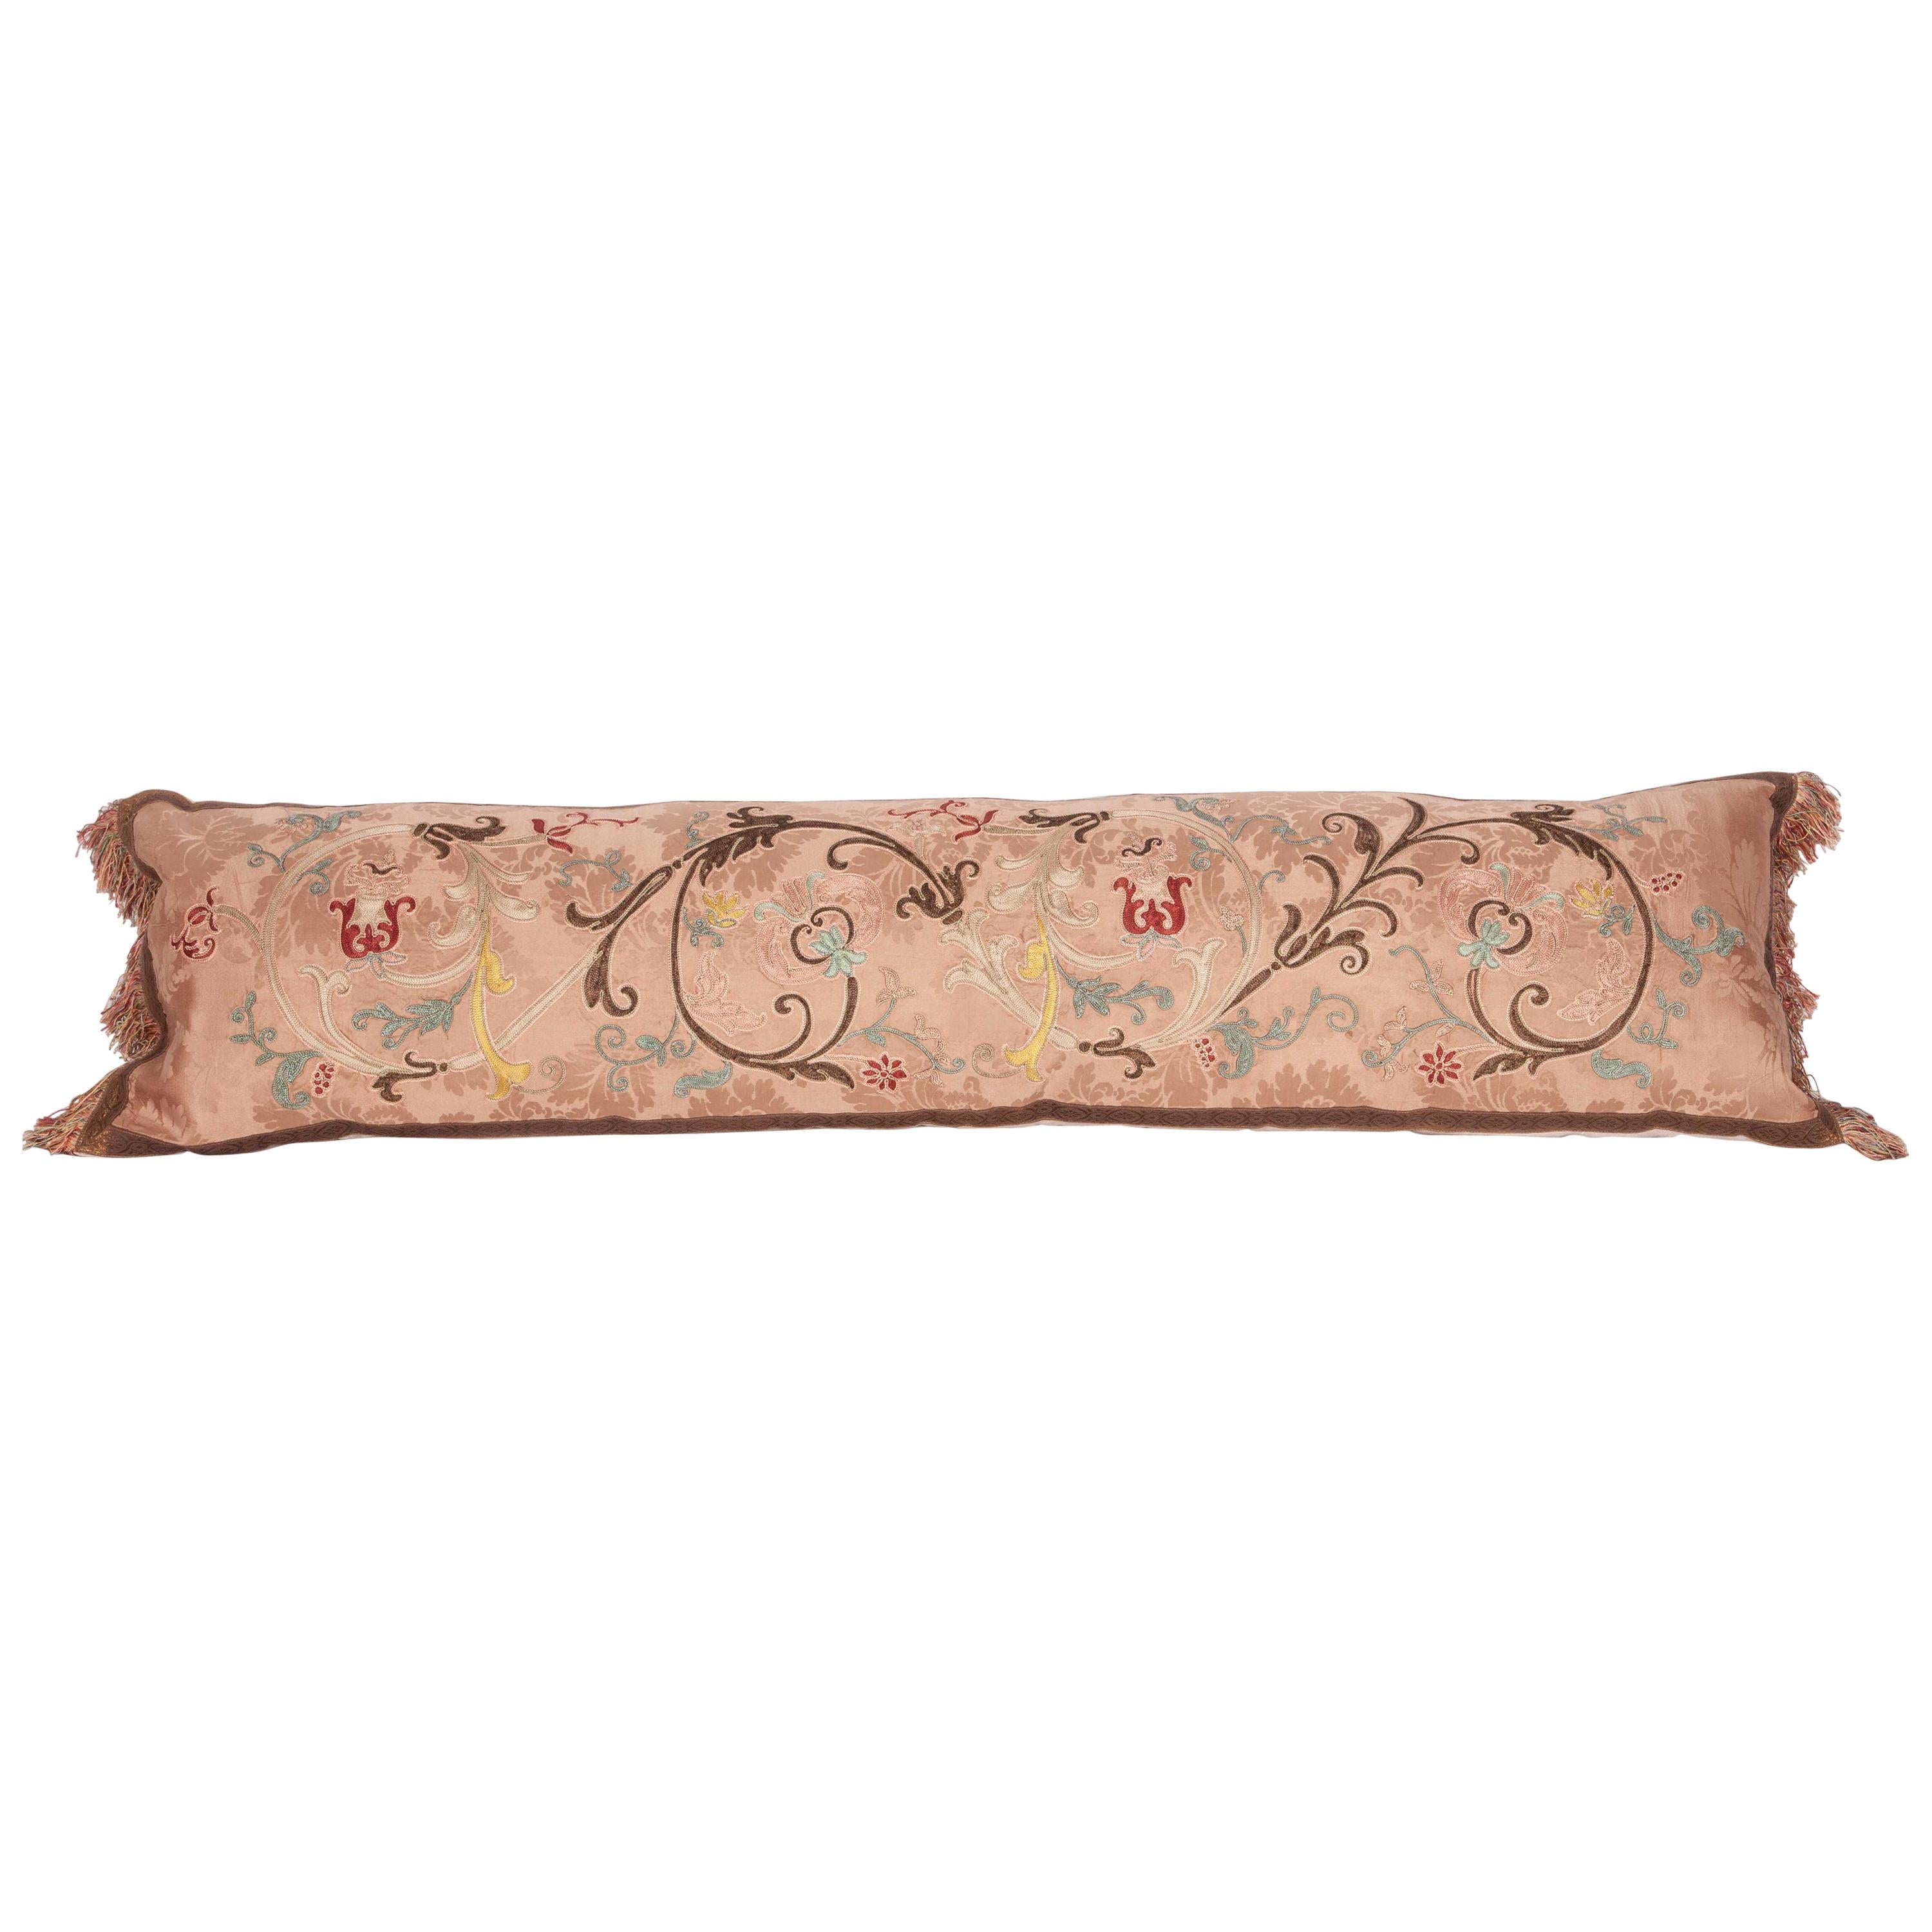 Long Pillow Case Fashioned from a European Embroidery, Late 19th Century